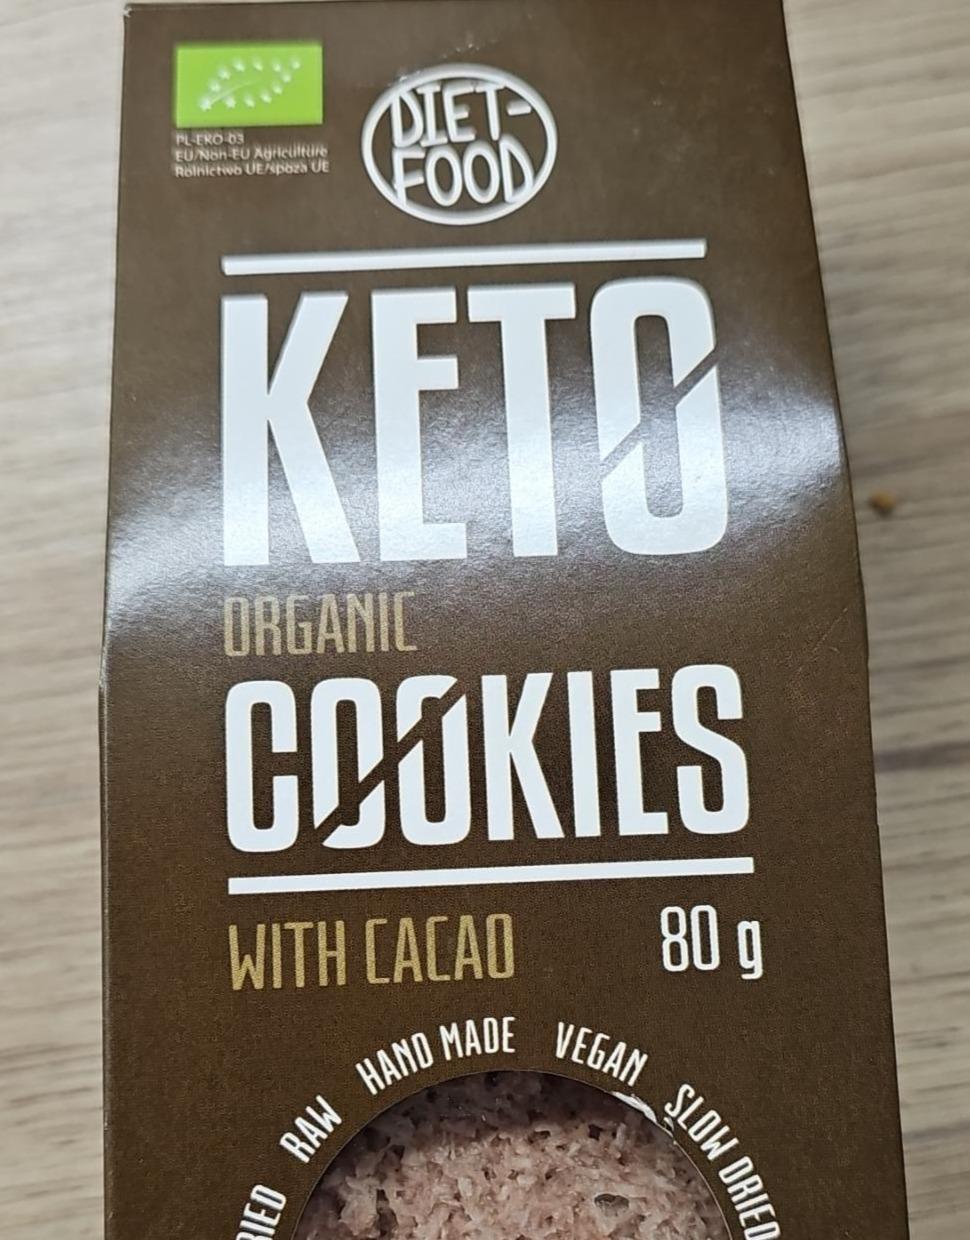 Fotografie - Keto organic cookied with cacao Diet-Food